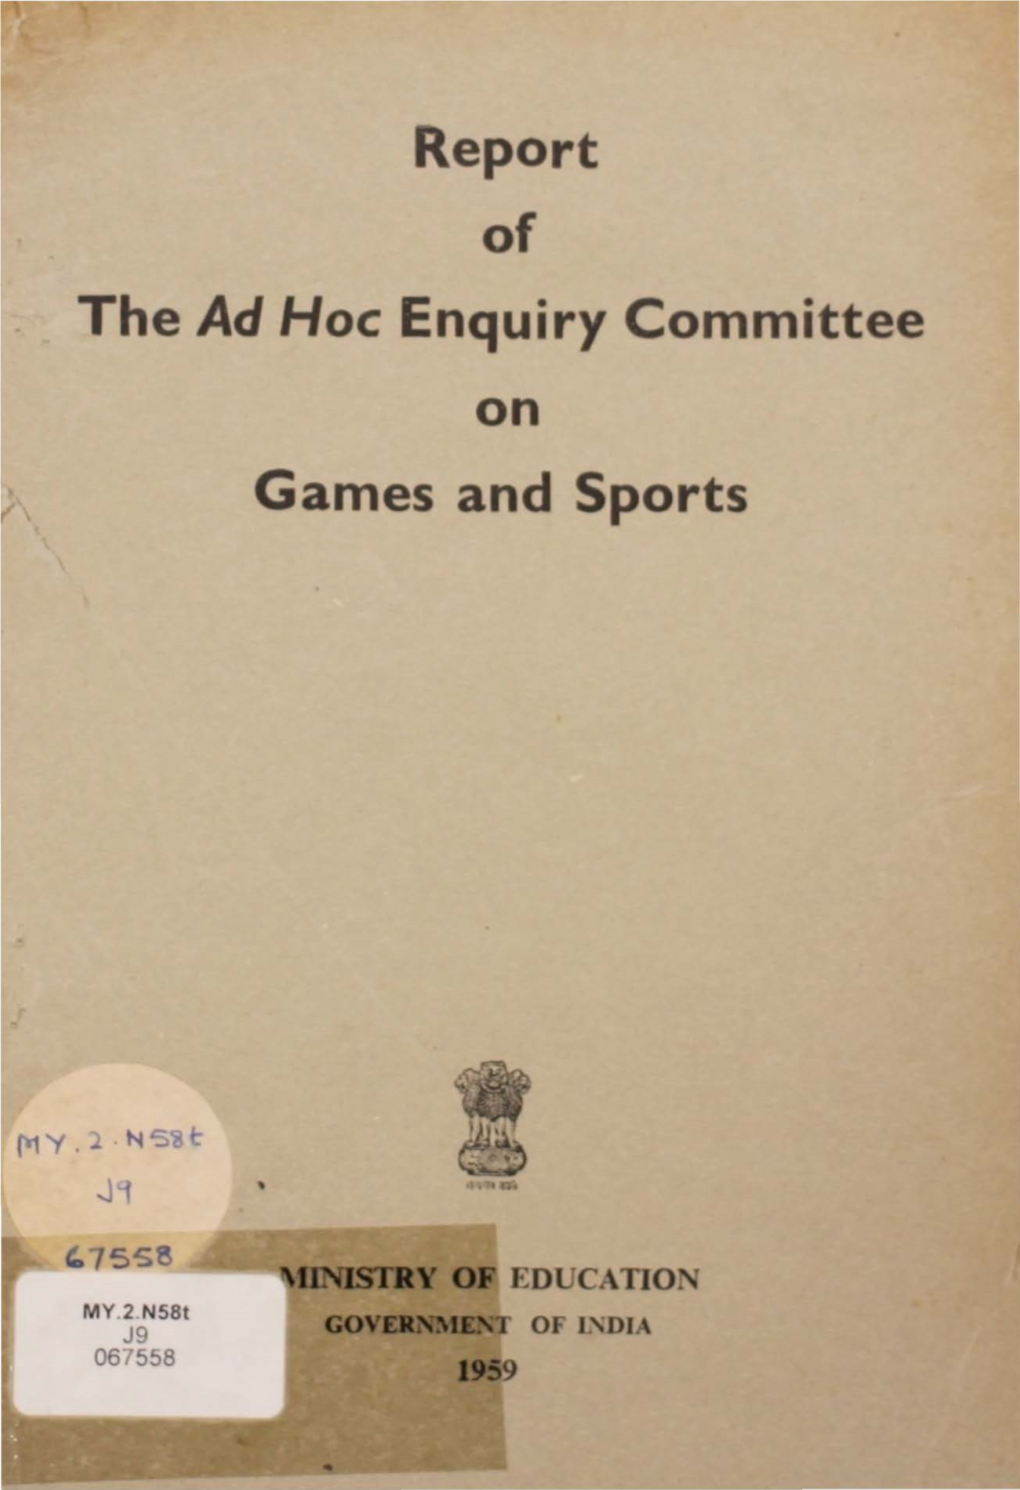 Report the Ad Hoc Enquiry Committee on Games and Sports